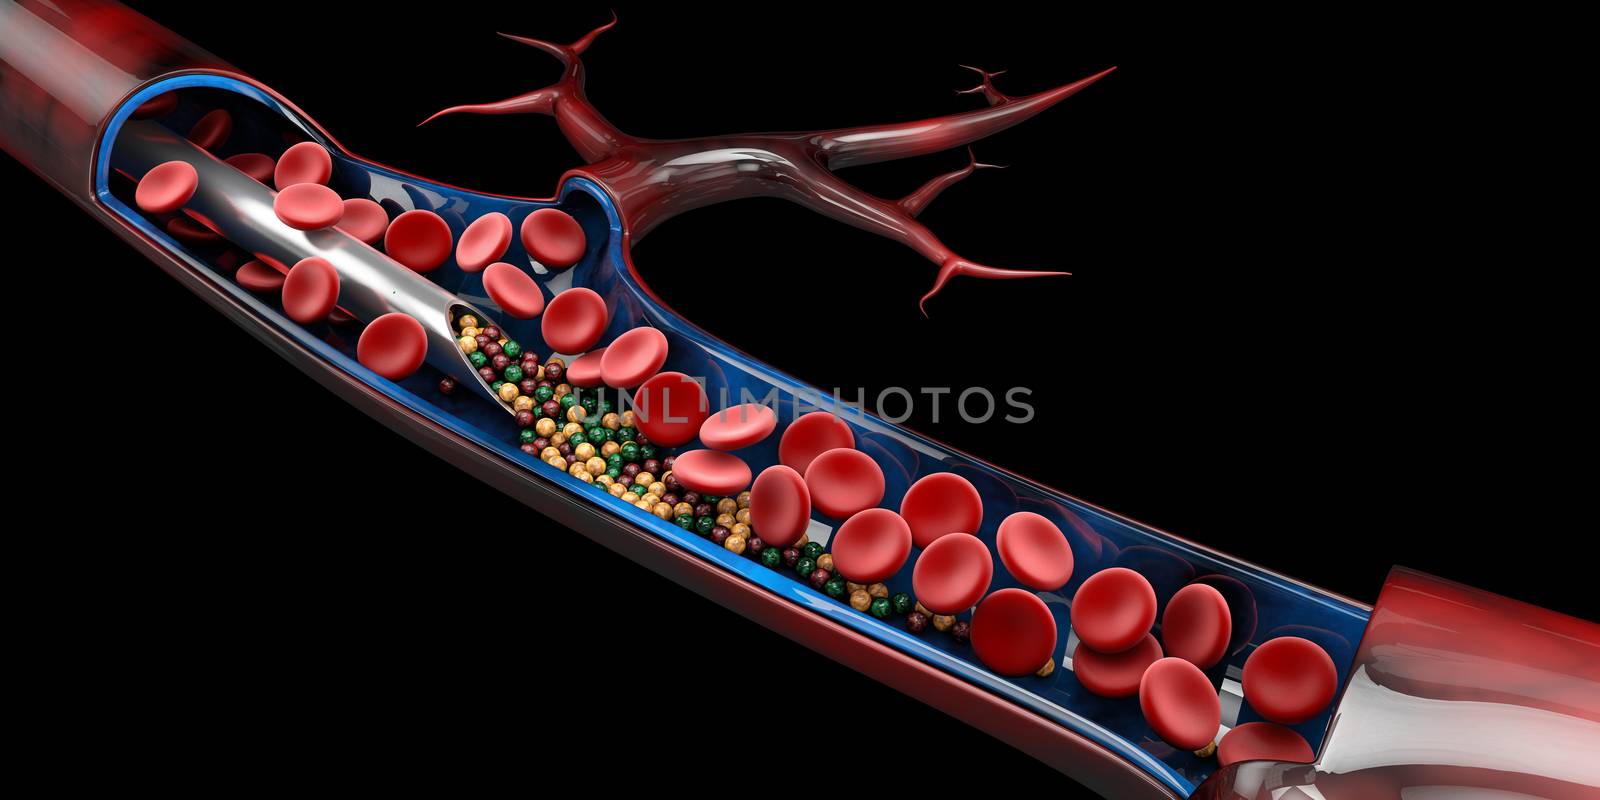 3d Illustration of syringe with vitamine and red blood cells by tussik